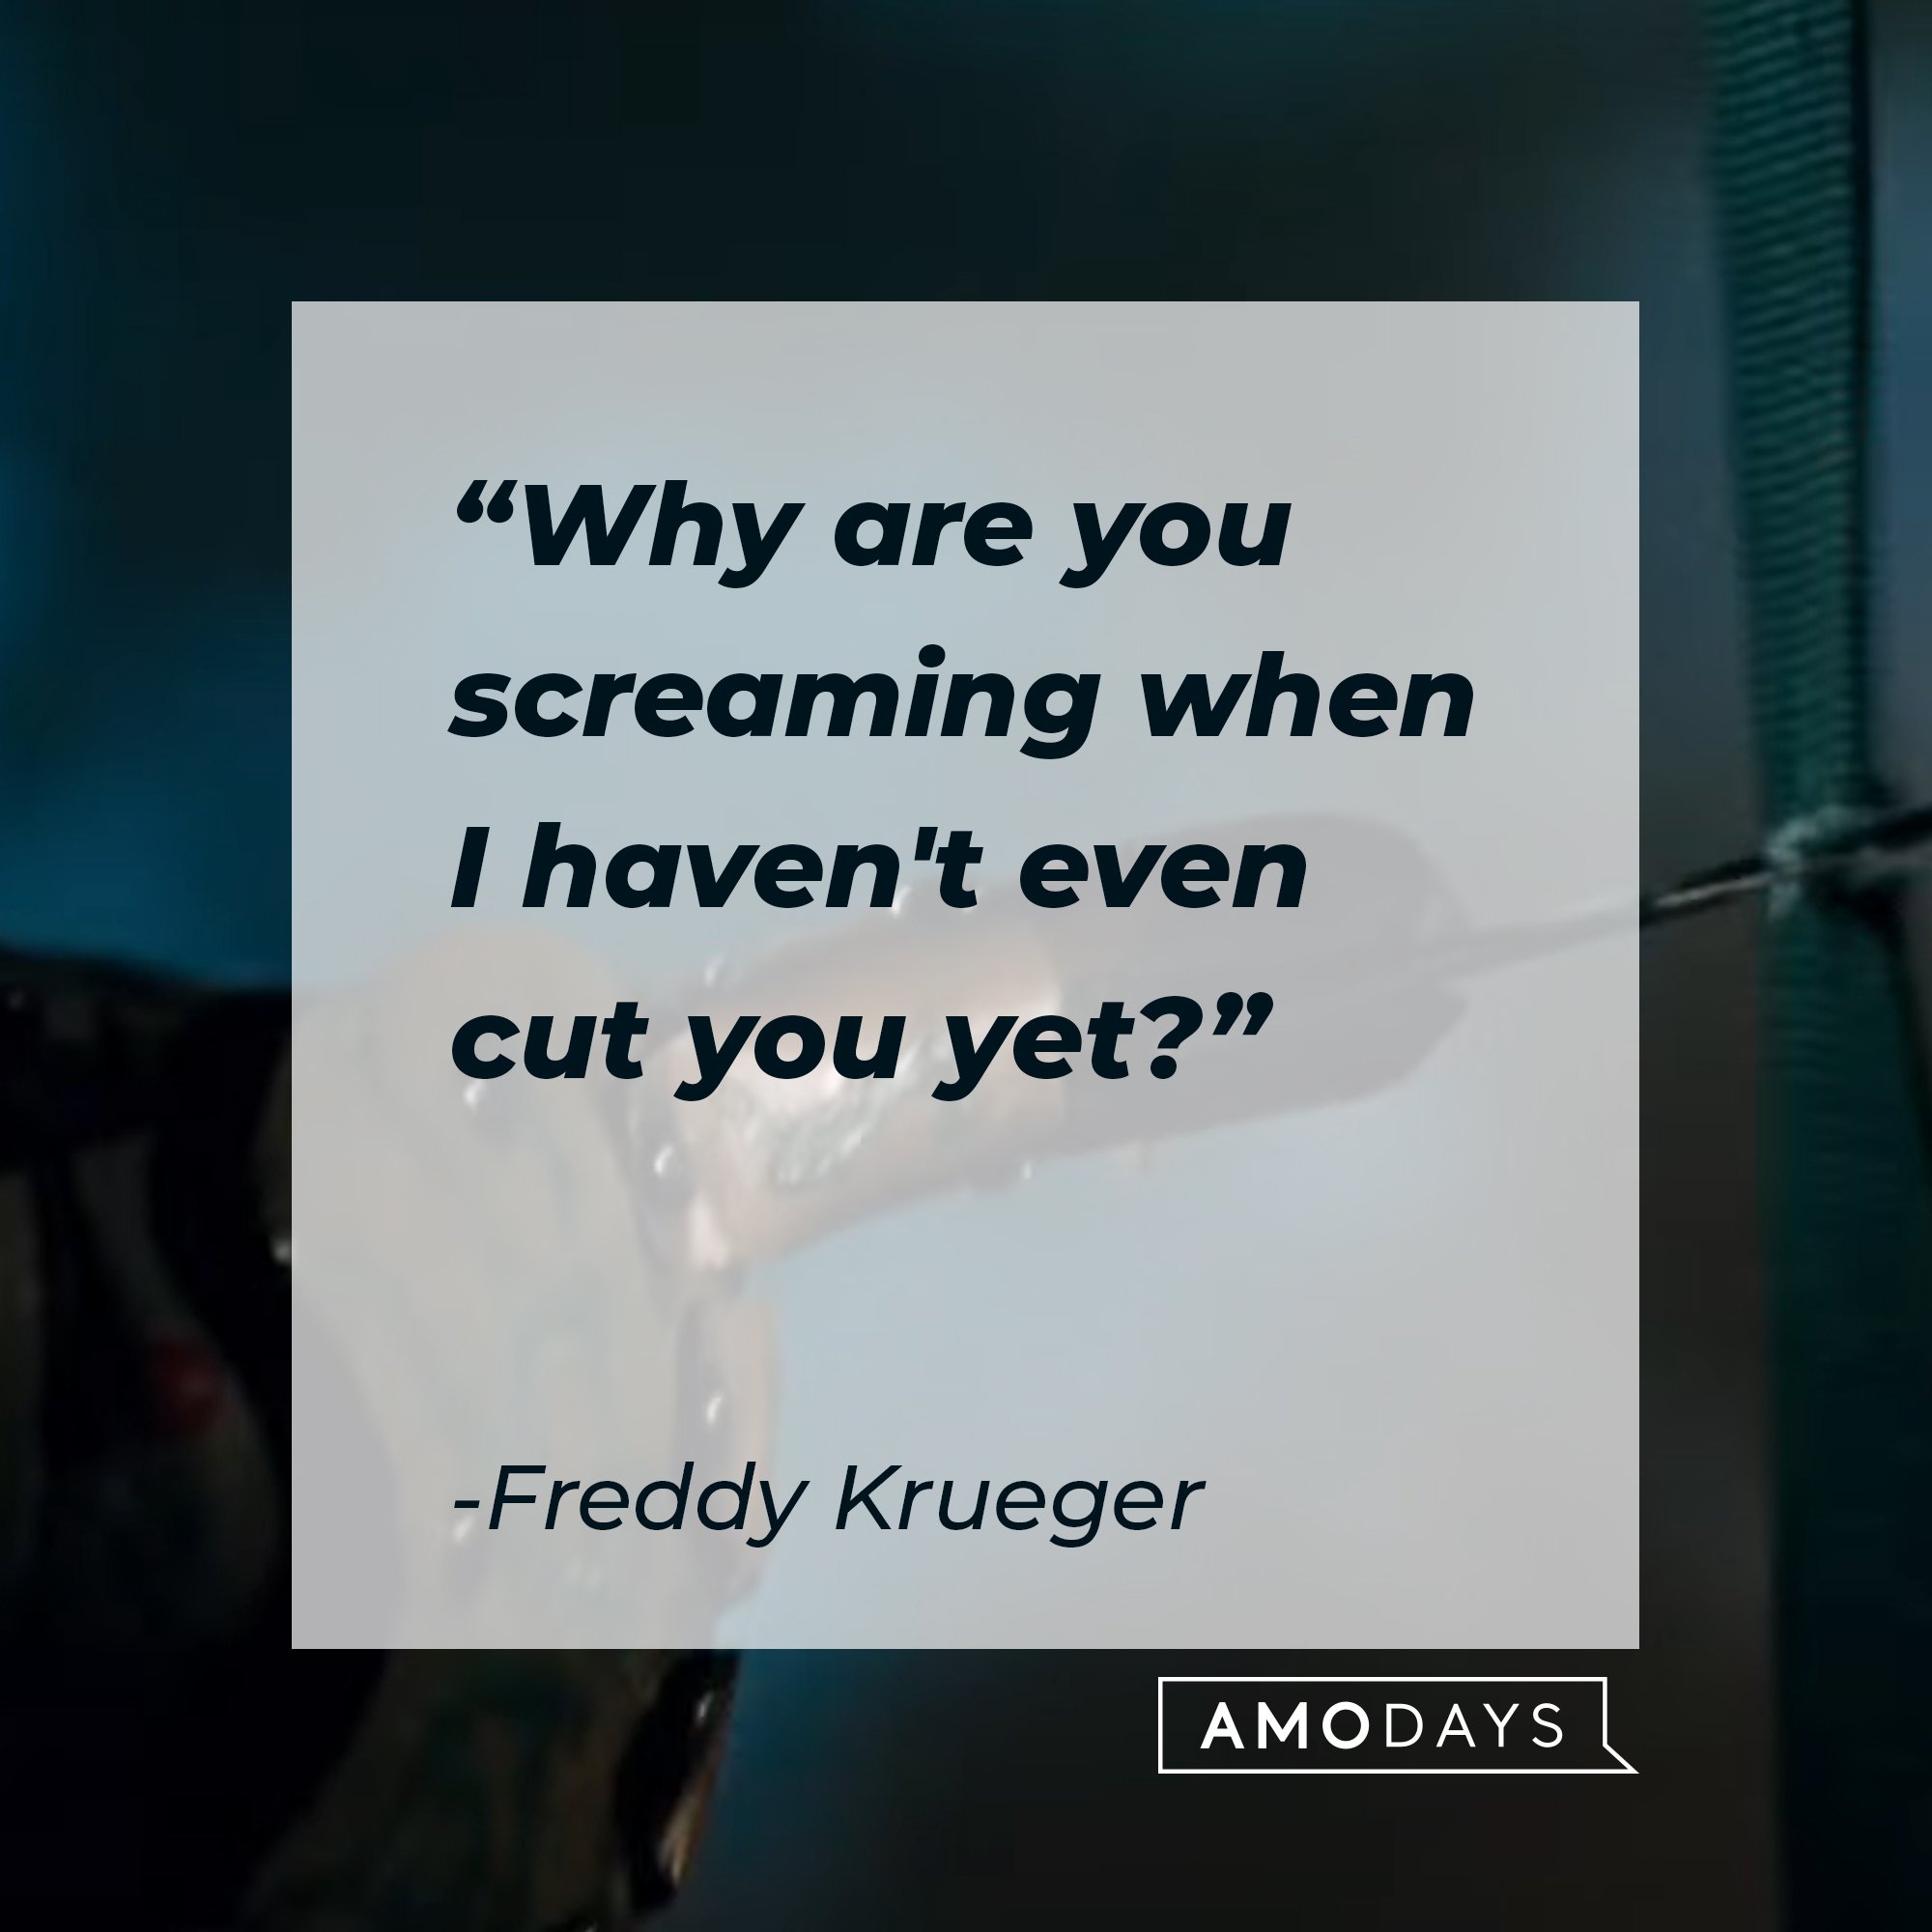 Freddy Krueger’s quote: “Why are you screaming when I haven't even cut you yet?" | Image: AmoDays